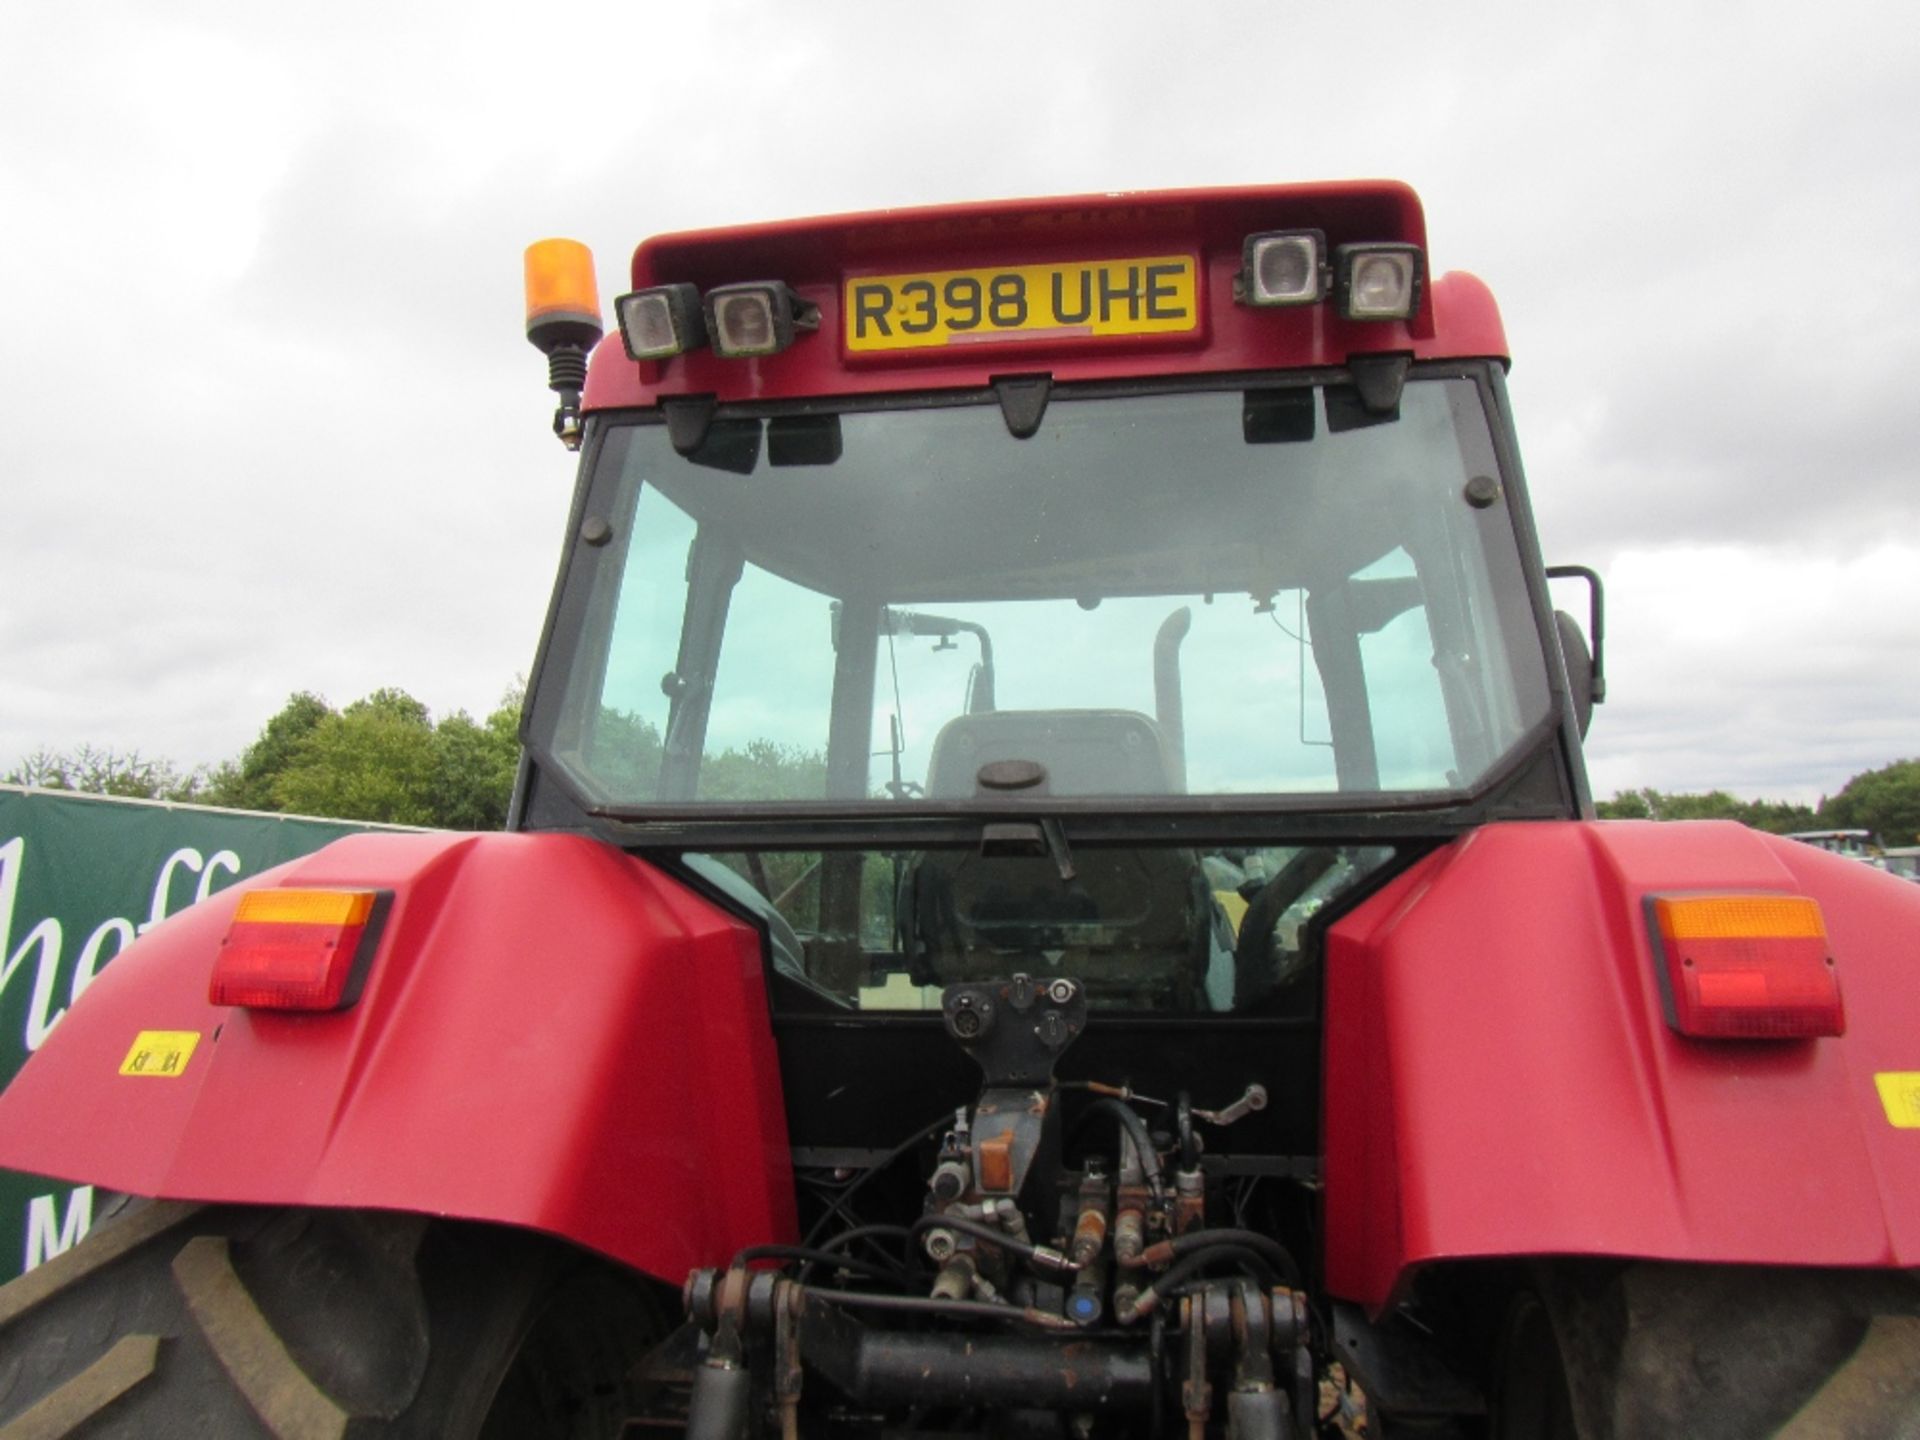 1998 Case CS150 Tractor 6700 hrs. Reg. No. R398 UHE - Image 9 of 17